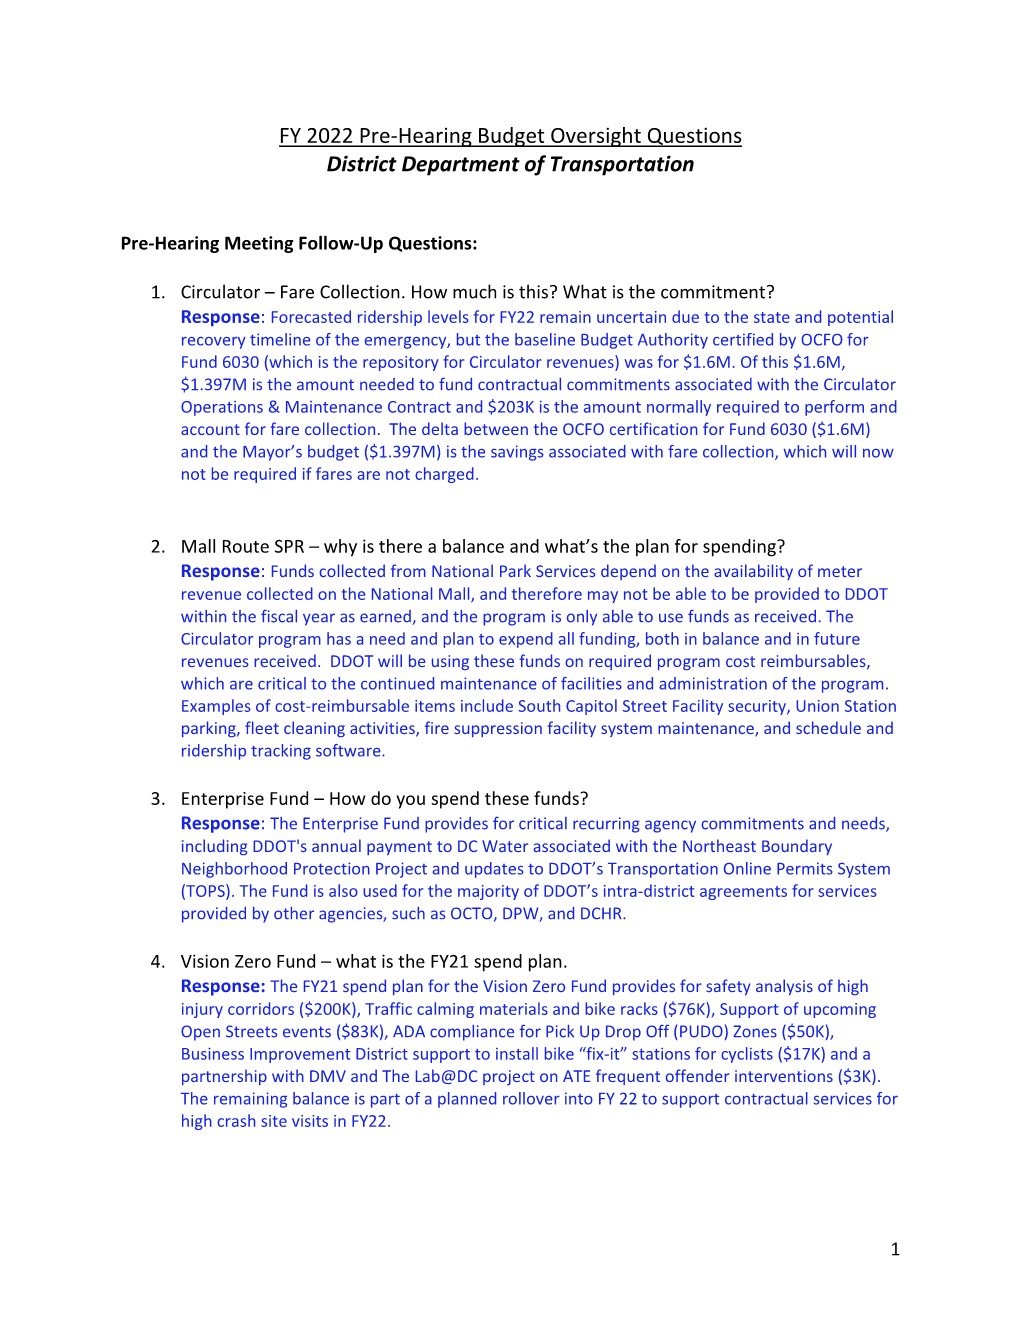 FY 2022 Pre-Hearing Budget Oversight Questions District Department of Transportation